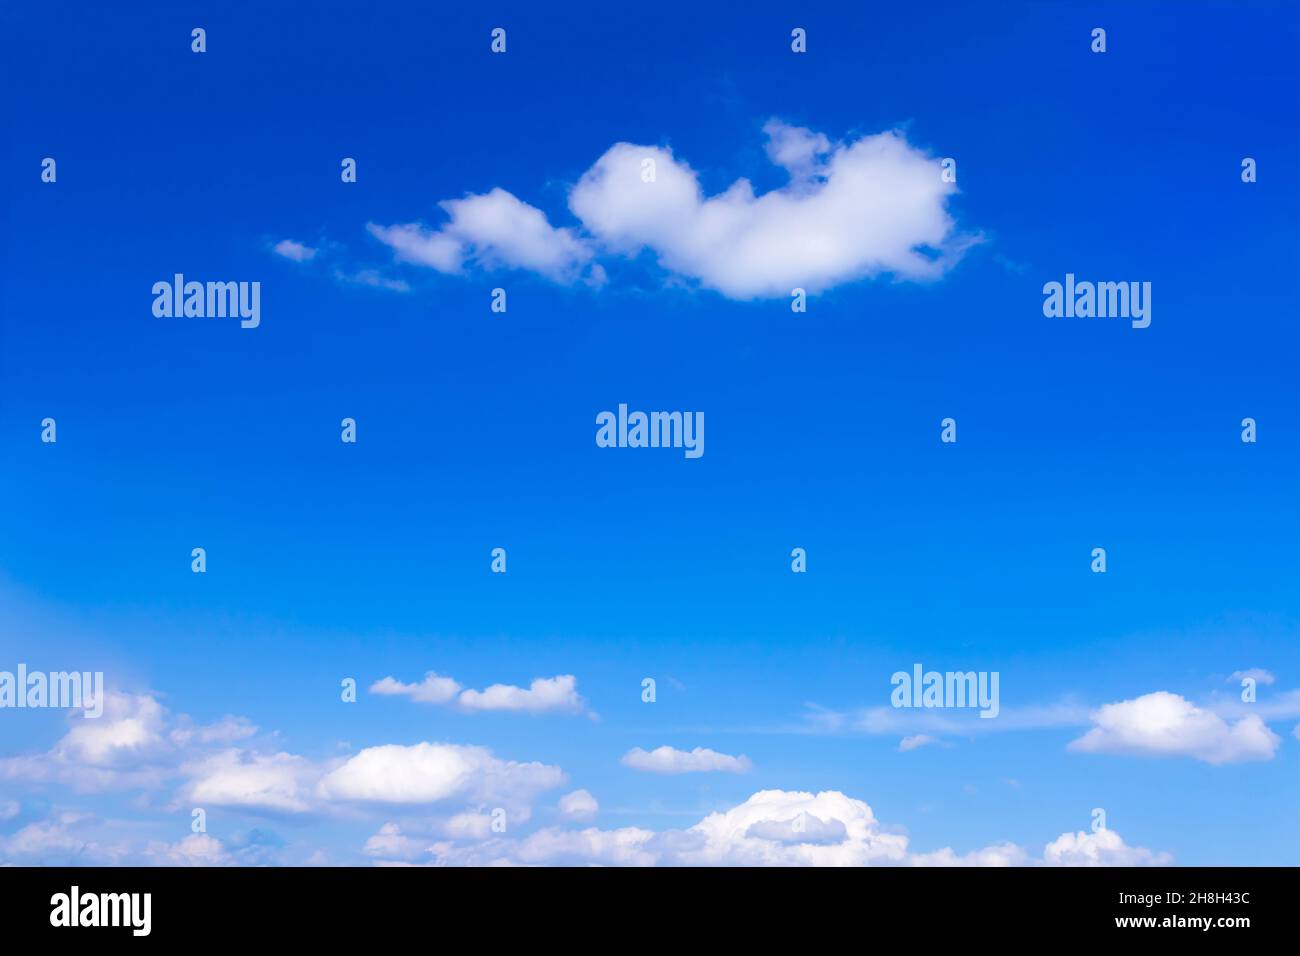 Bright blue summer sky with a few fluffy white clouds, background texture, copy or text space. Stock Photo